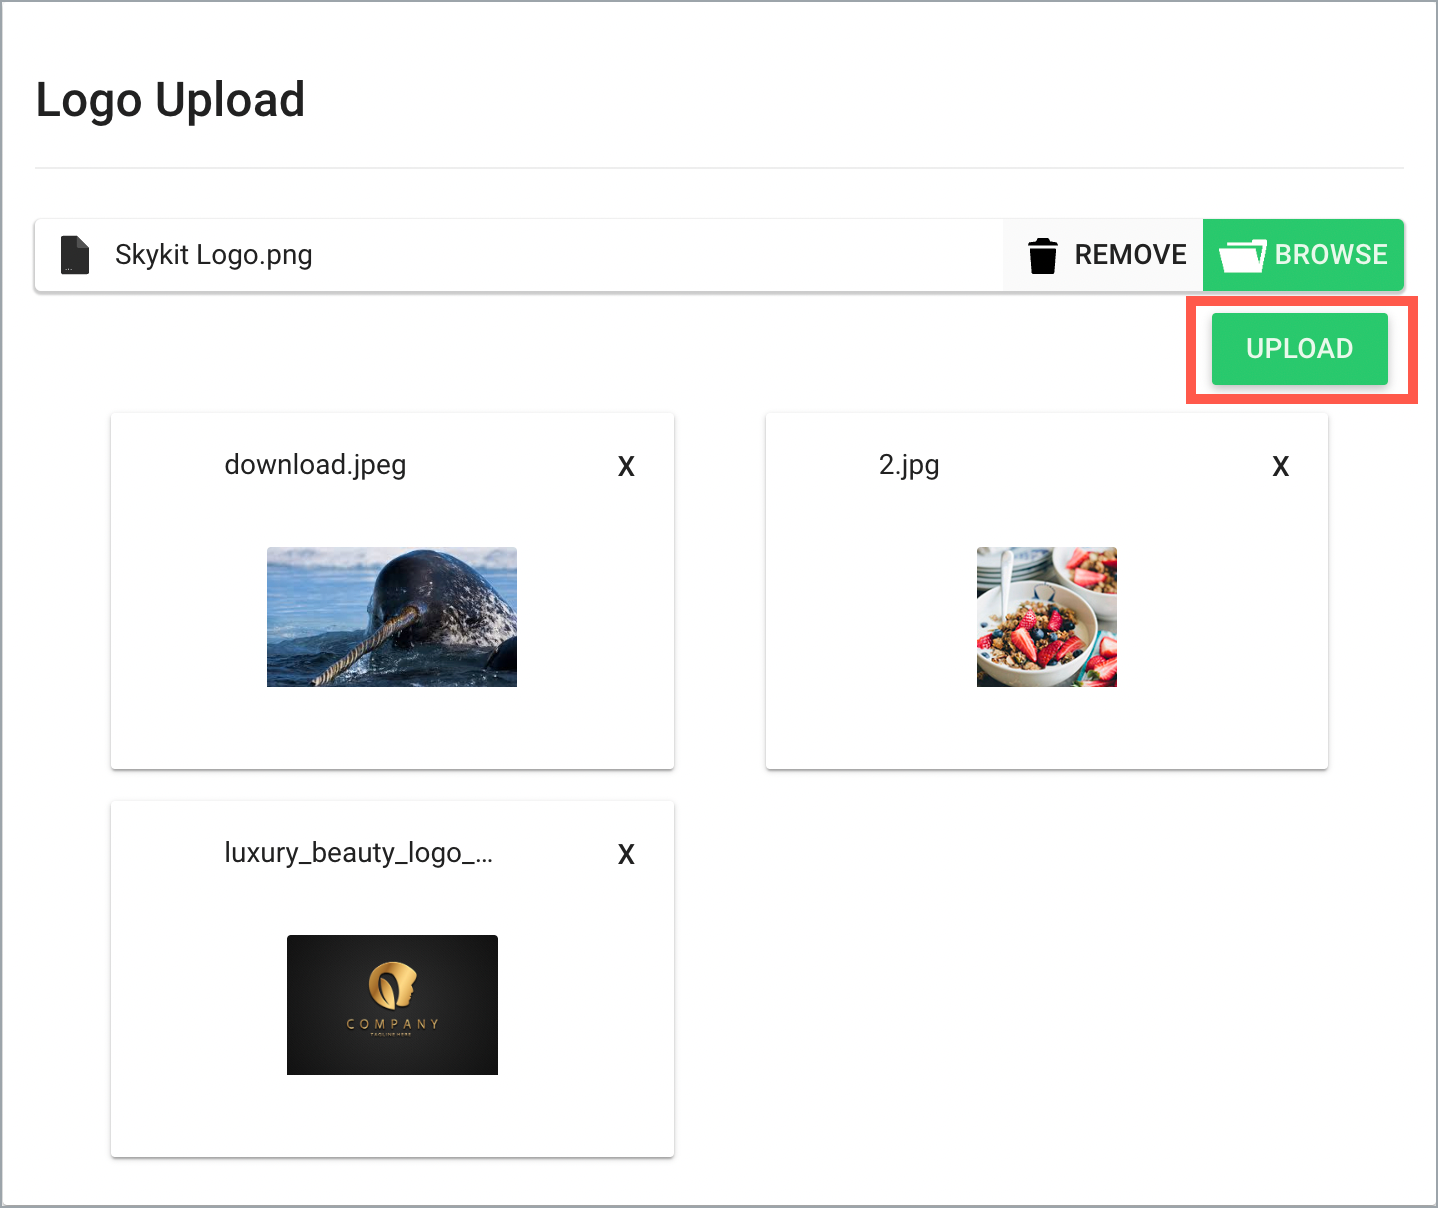 Logo Upload section - Upload button highlighted